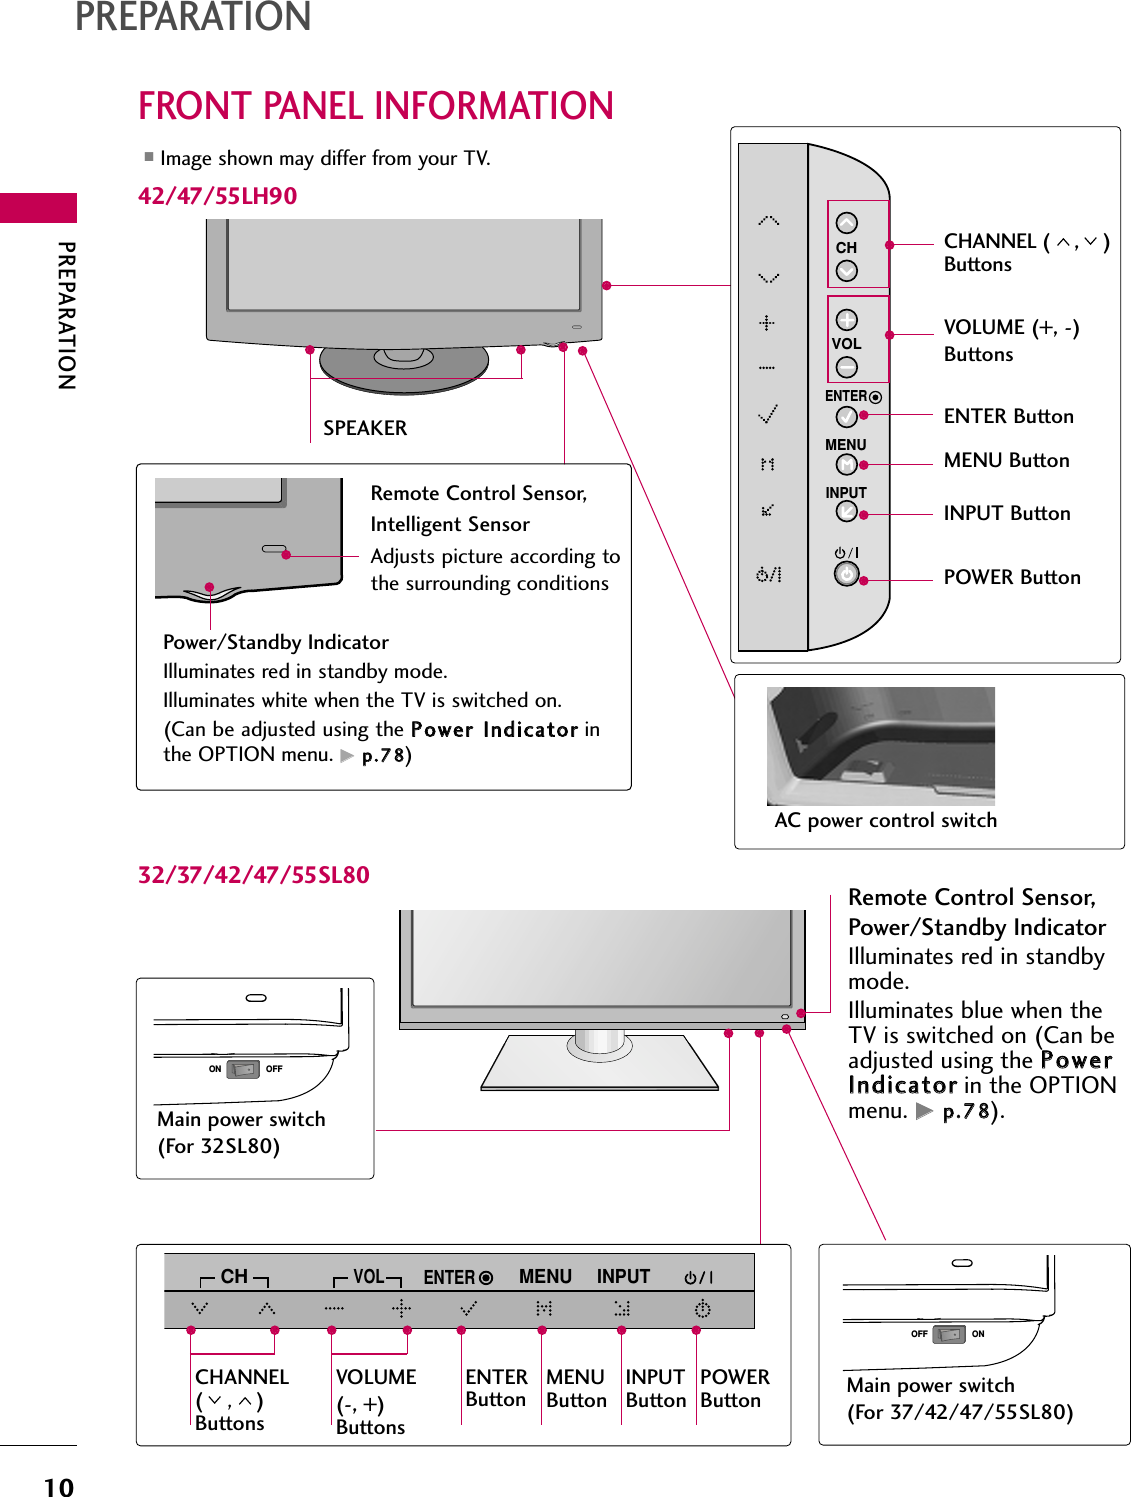 PREPARATION10FRONT PANEL INFORMATIONPREPARATION■Image shown may differ from your TV.INPUTMENUENTERCHVOLCHANNEL ( , )ButtonsVOLUME (+, -) ButtonsENTER ButtonMENU ButtonINPUT ButtonPOWER ButtonAC power control switchSPEAKERPower/Standby IndicatorIlluminates red in standby mode.Illuminates white when the TV is switched on.(Can be adjusted using the PPoowweerr  IInnddiiccaattoorrinthe OPTION menu. GGpp..7788)Remote Control Sensor,Power/Standby IndicatorIlluminates red in standbymode.Illuminates blue when theTV is switched on (Can beadjusted using the PPoowweerrIInnddiiccaattoorrin the OPTIONmenu. GGpp..7788).Remote Control Sensor,Intelligent SensorAdjusts picture according tothe surrounding conditions 42/47/55LH9032/37/42/47/55SL80INPUTMENUENTERCHVOLINPUTButtonPOWERButtonMENUButtonENTERButtonVOLUME(-, +)ButtonsCHANNEL(,)ButtonsMain power switch(For 37/42/47/55SL80)OFF ONMain power switch(For 32SL80)ON OFF